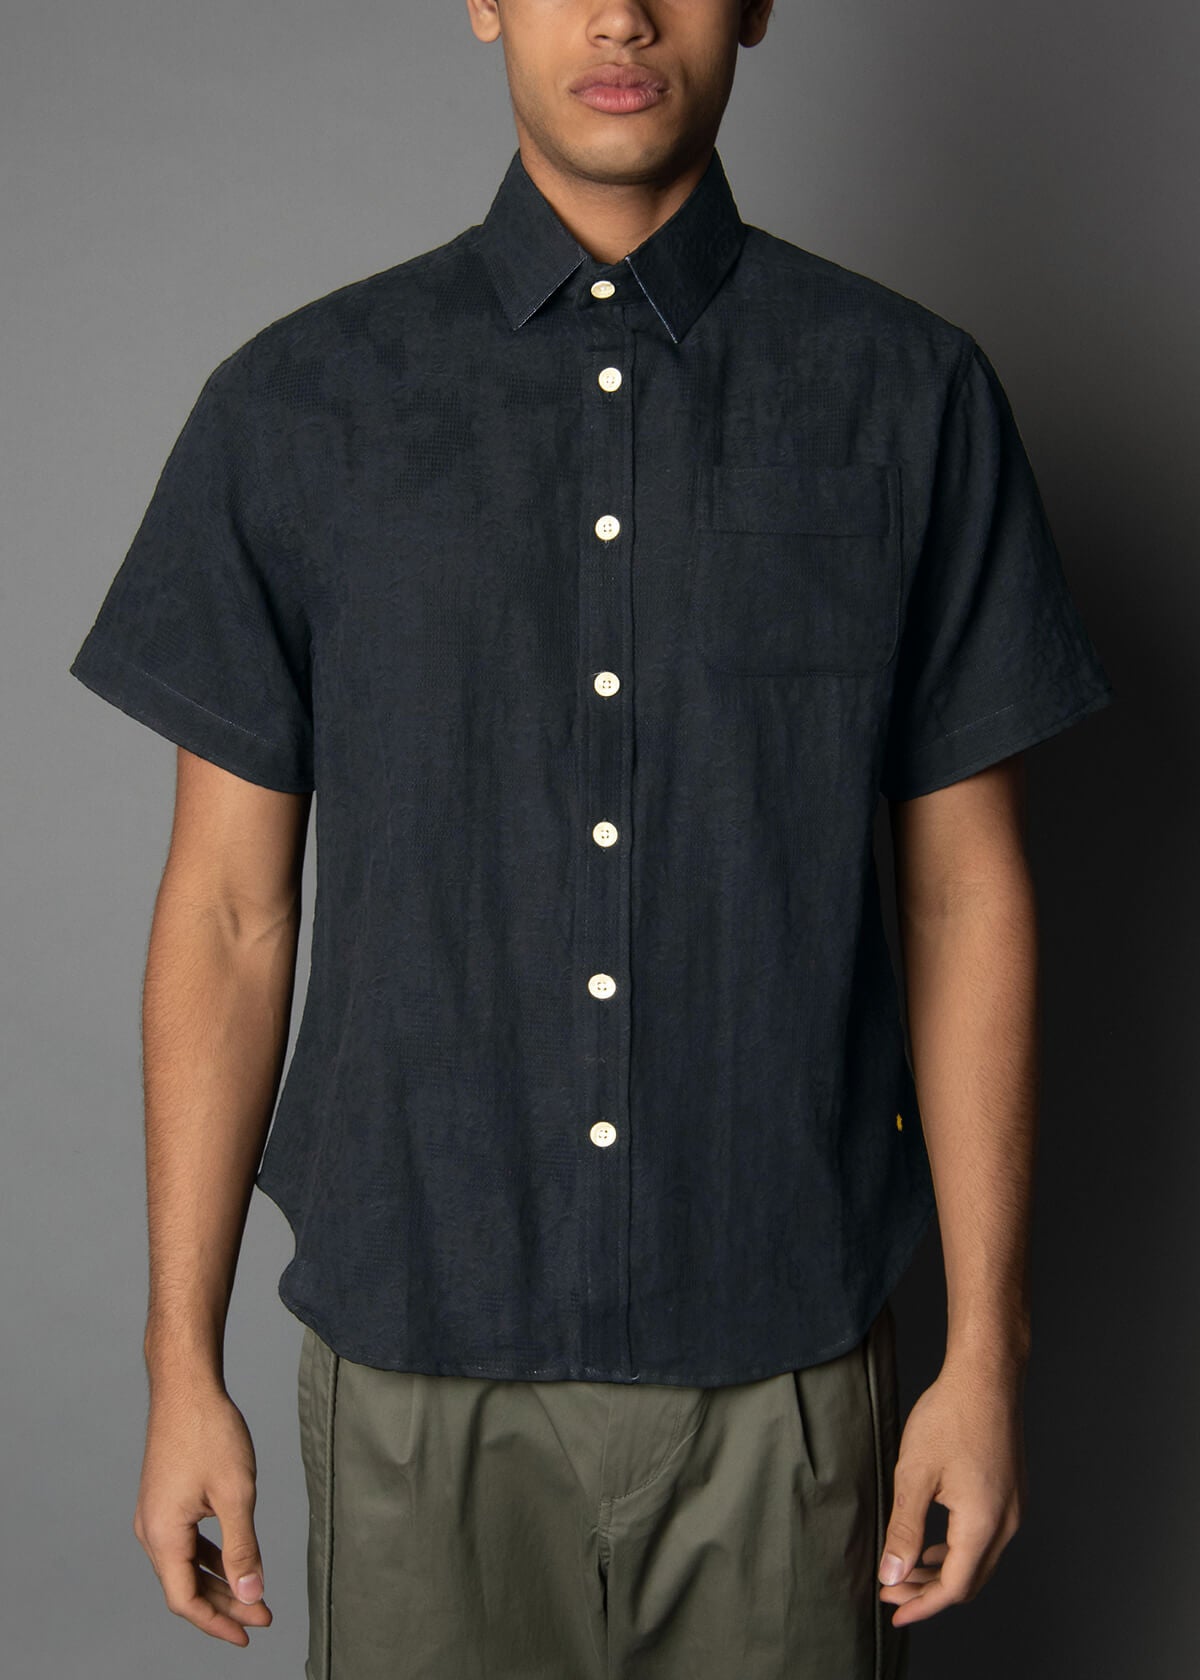 relaxed fit black short sleeve mens shirt